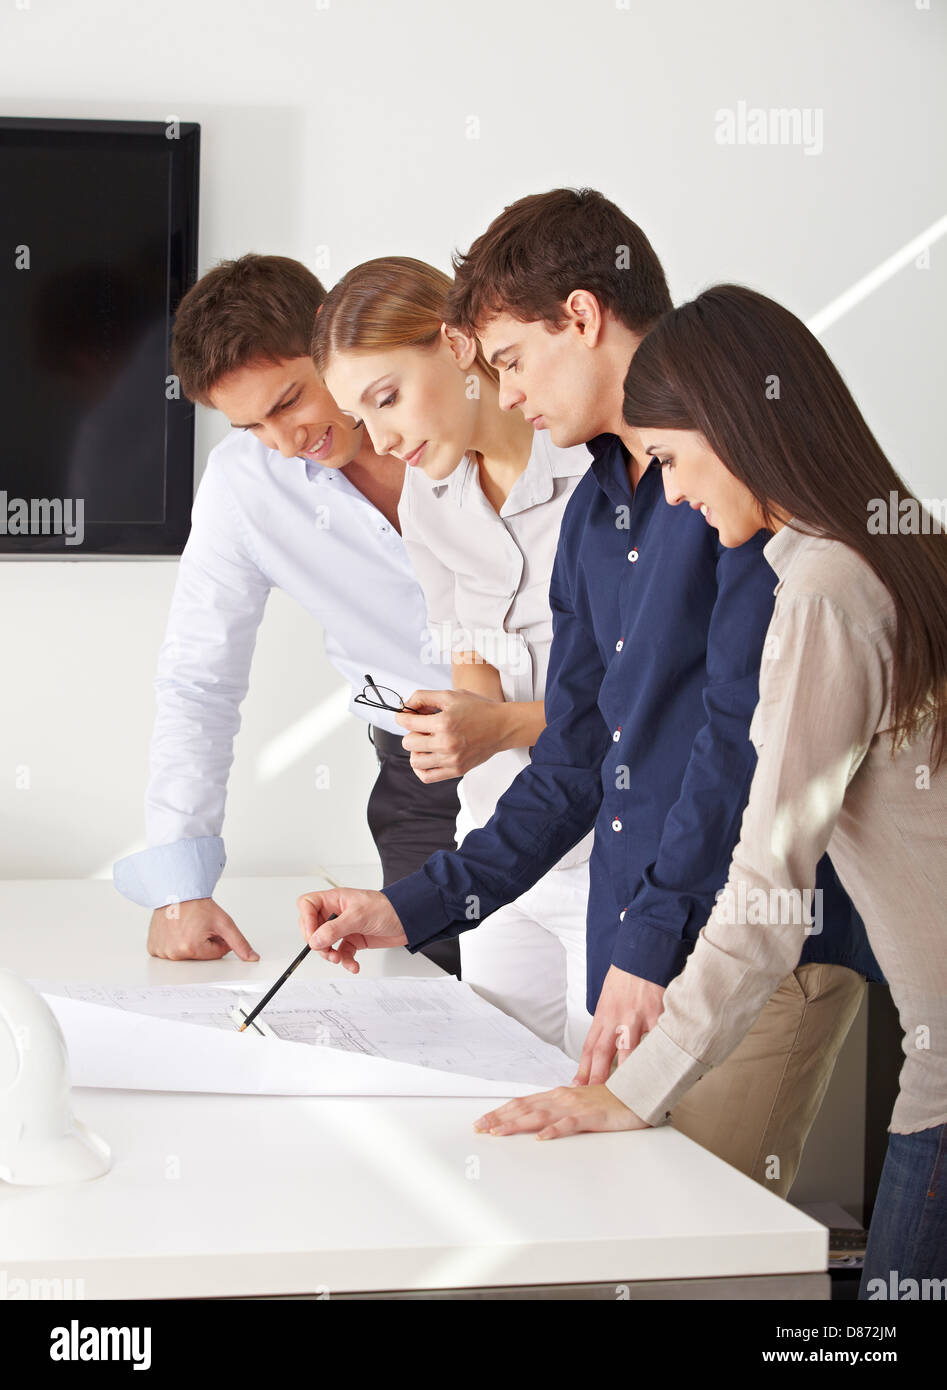 Architects team working on construction drawing in their office Stock Photo